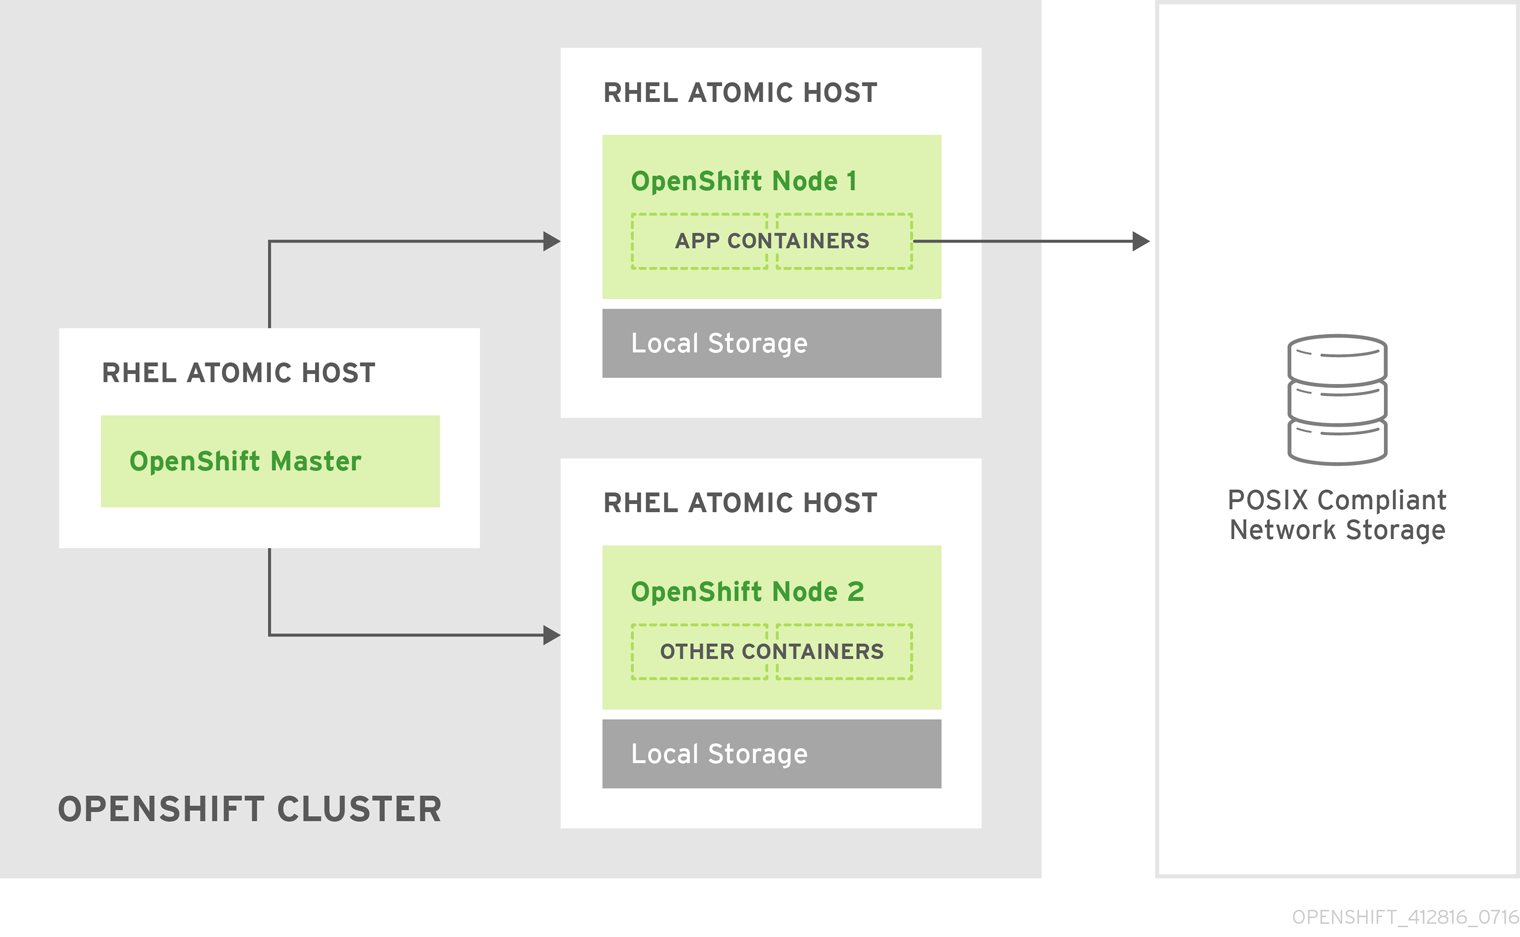 Architecture - Dedicated Red Hat Gluster Storage Cluster Using the OpenShift Container Platform Volume Plug-in